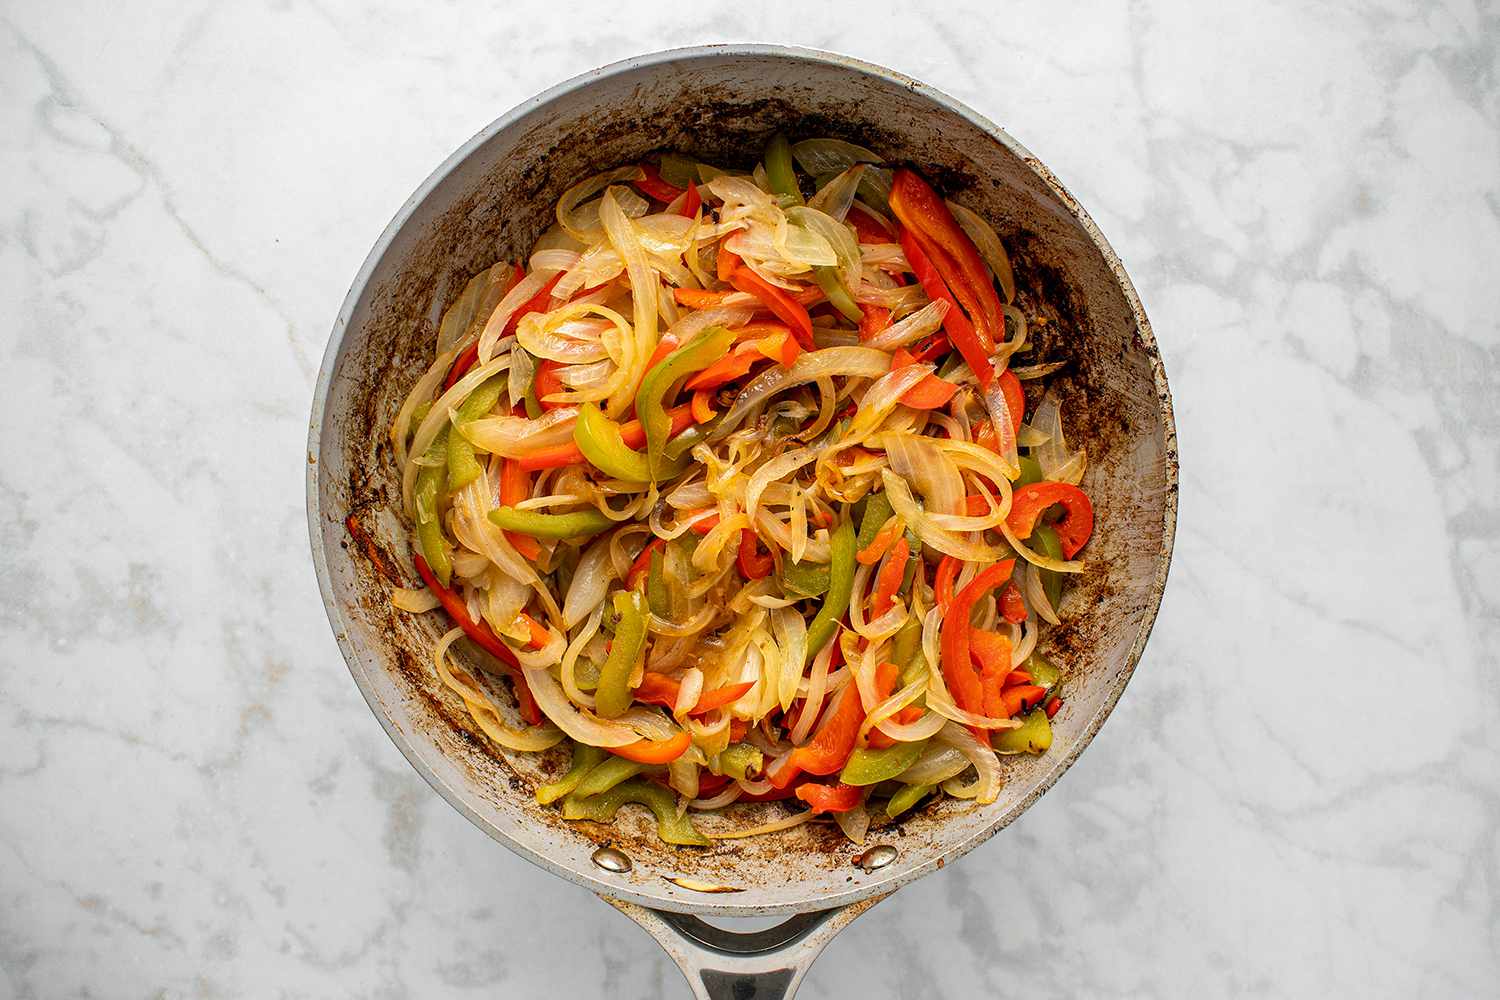 Sliced peppers and onions being sauteed in a large skillet